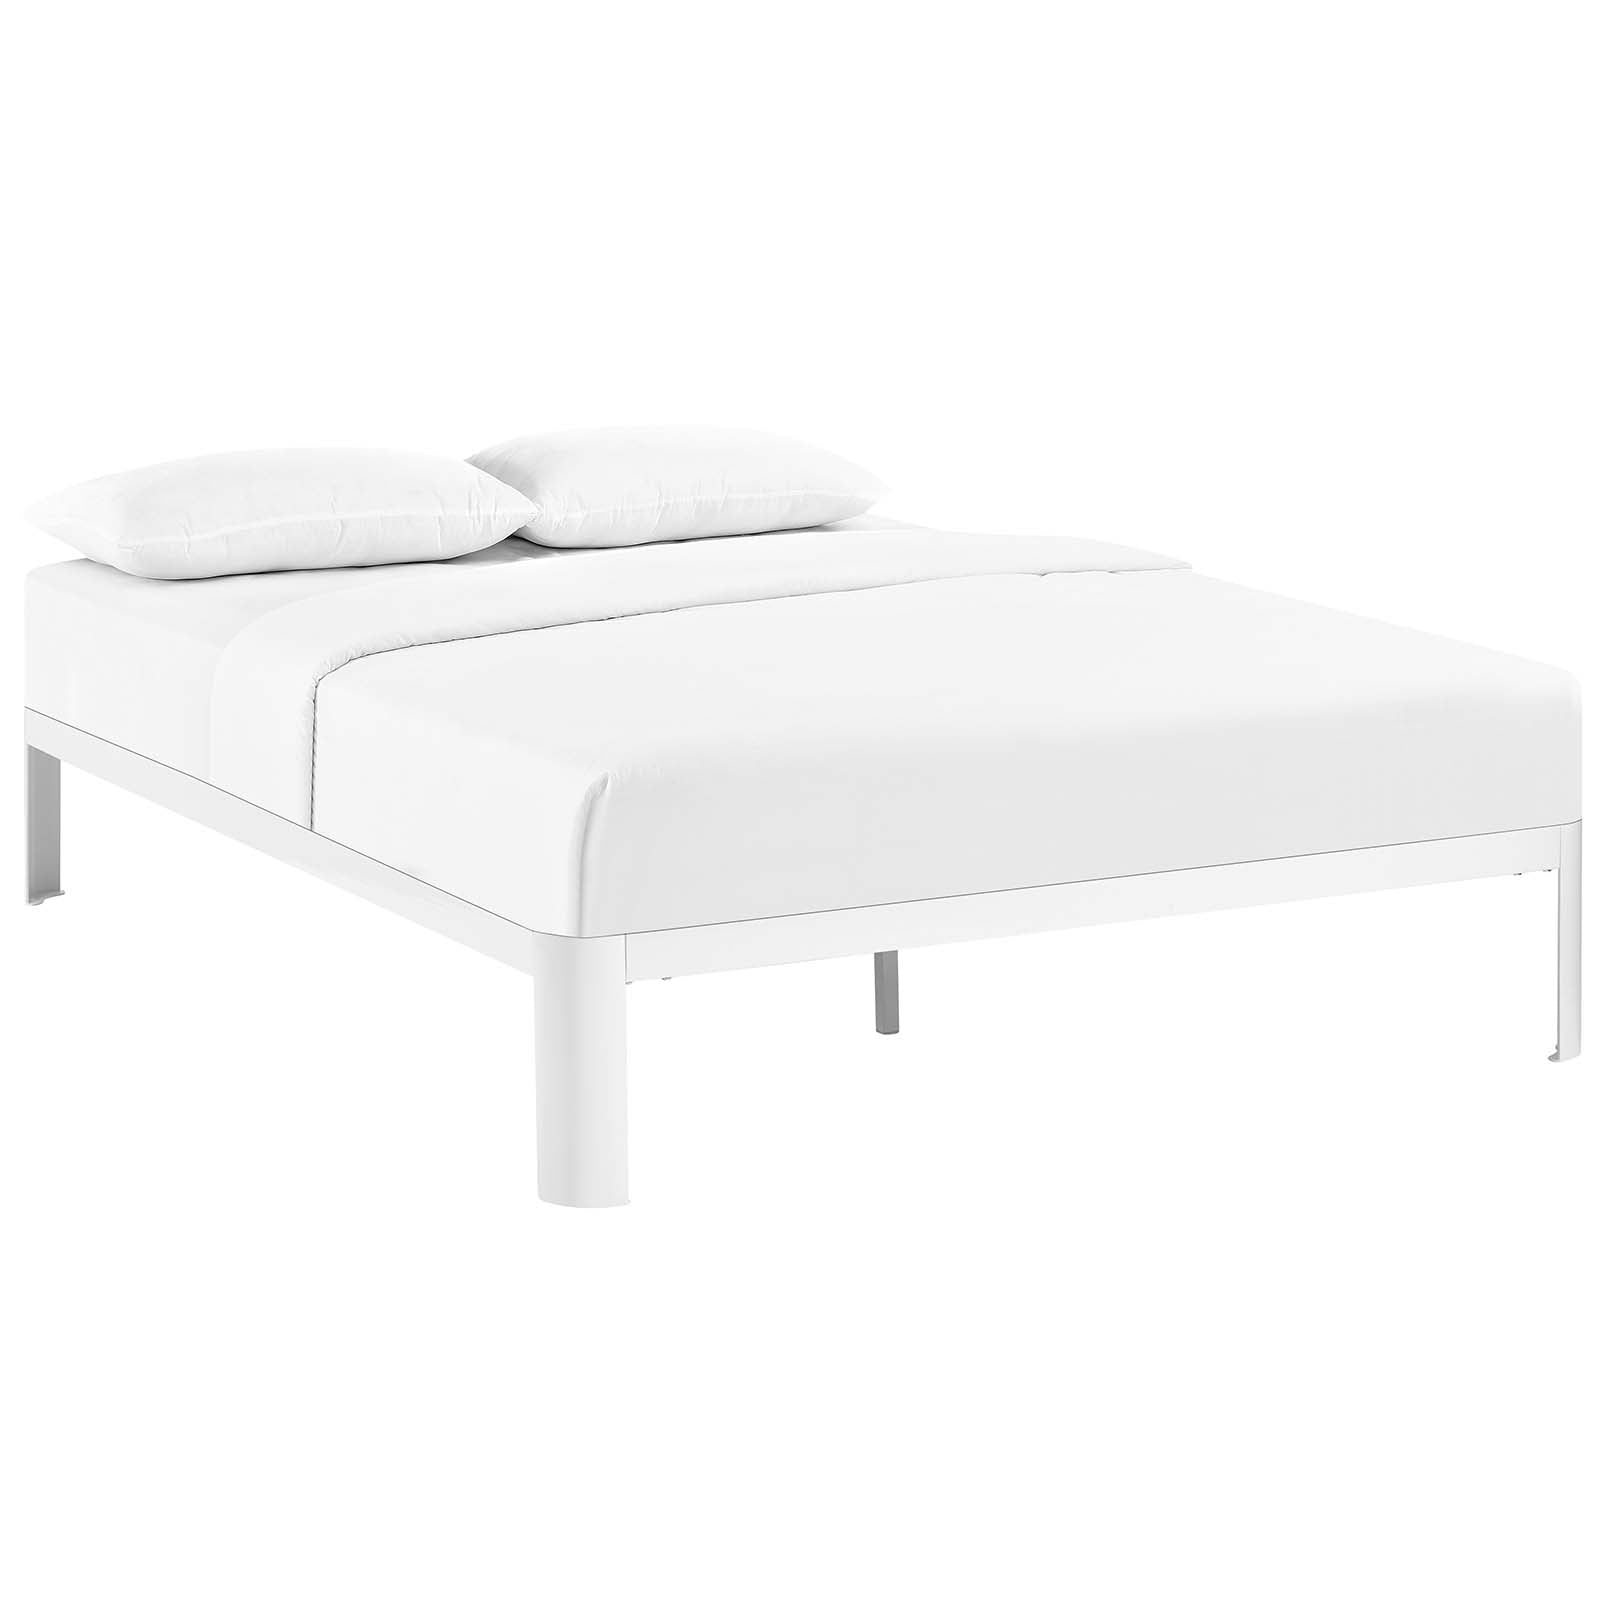 Modway Beds - Corinne Full Bed Frame White